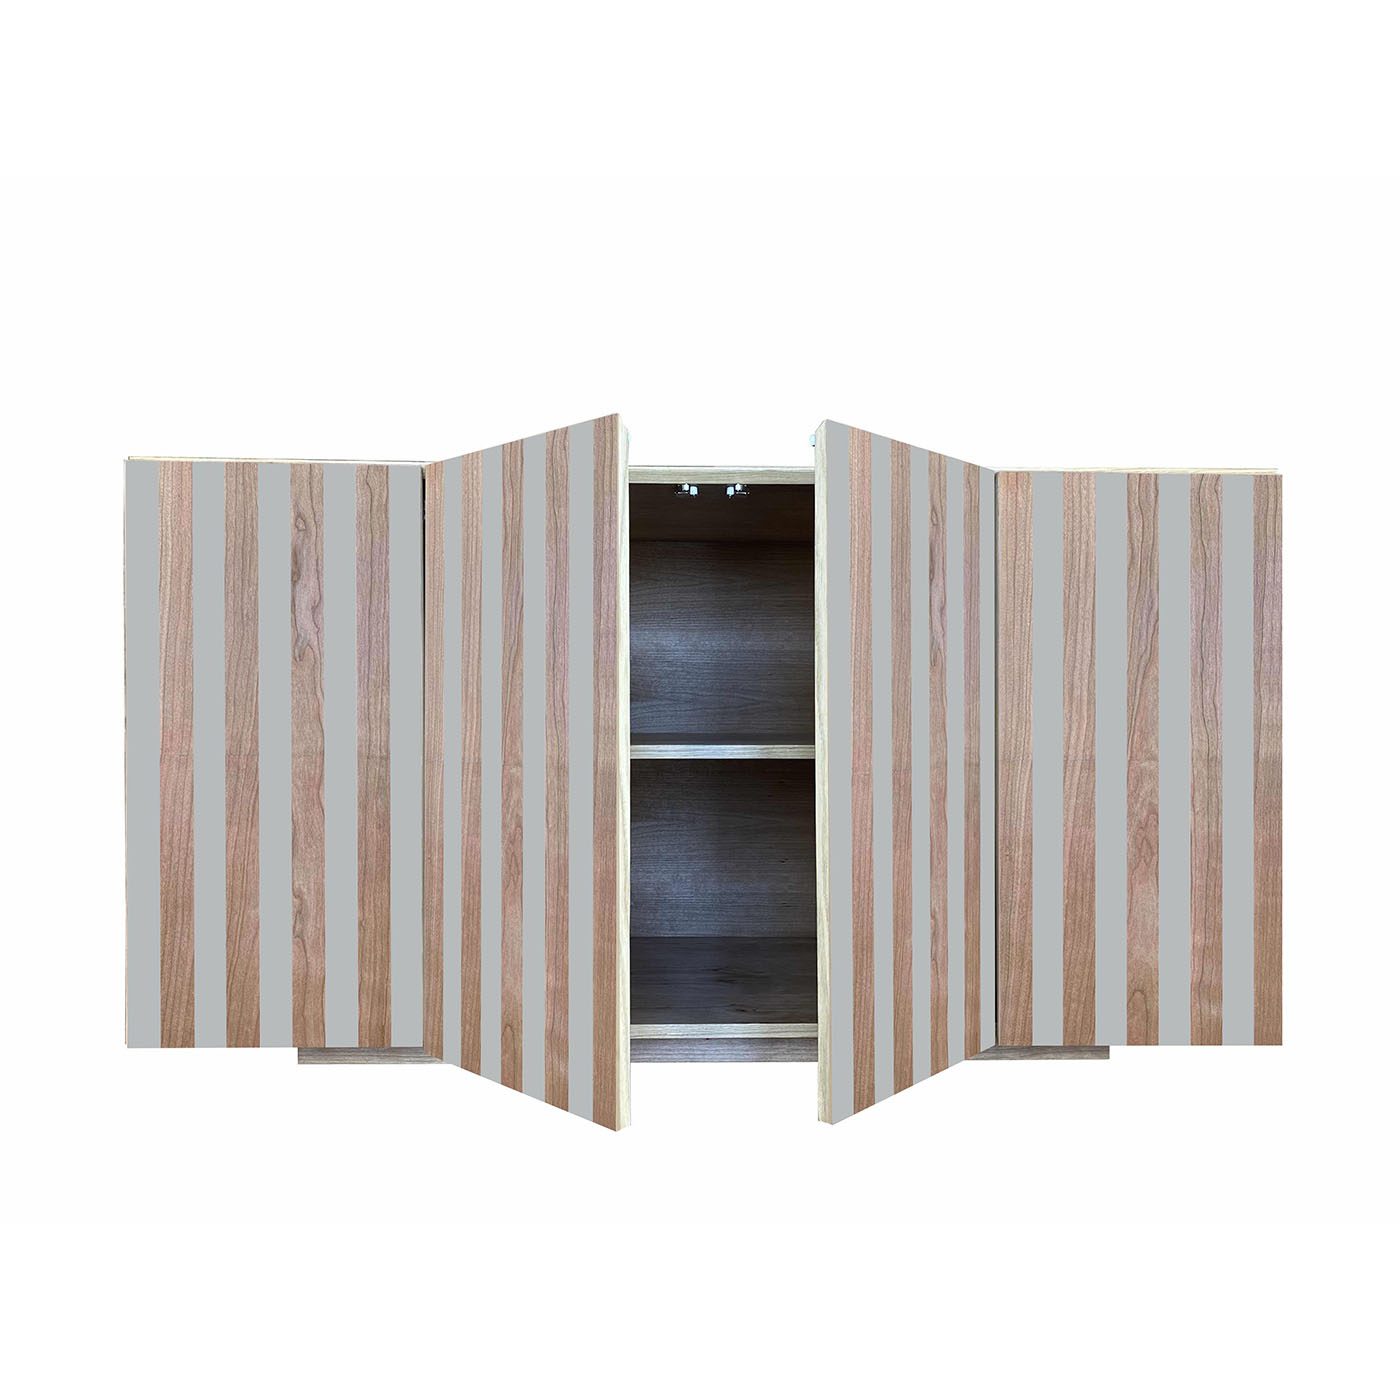 Md2 4-Door Striped Sideboard by Meccani Studio - Alternative view 4